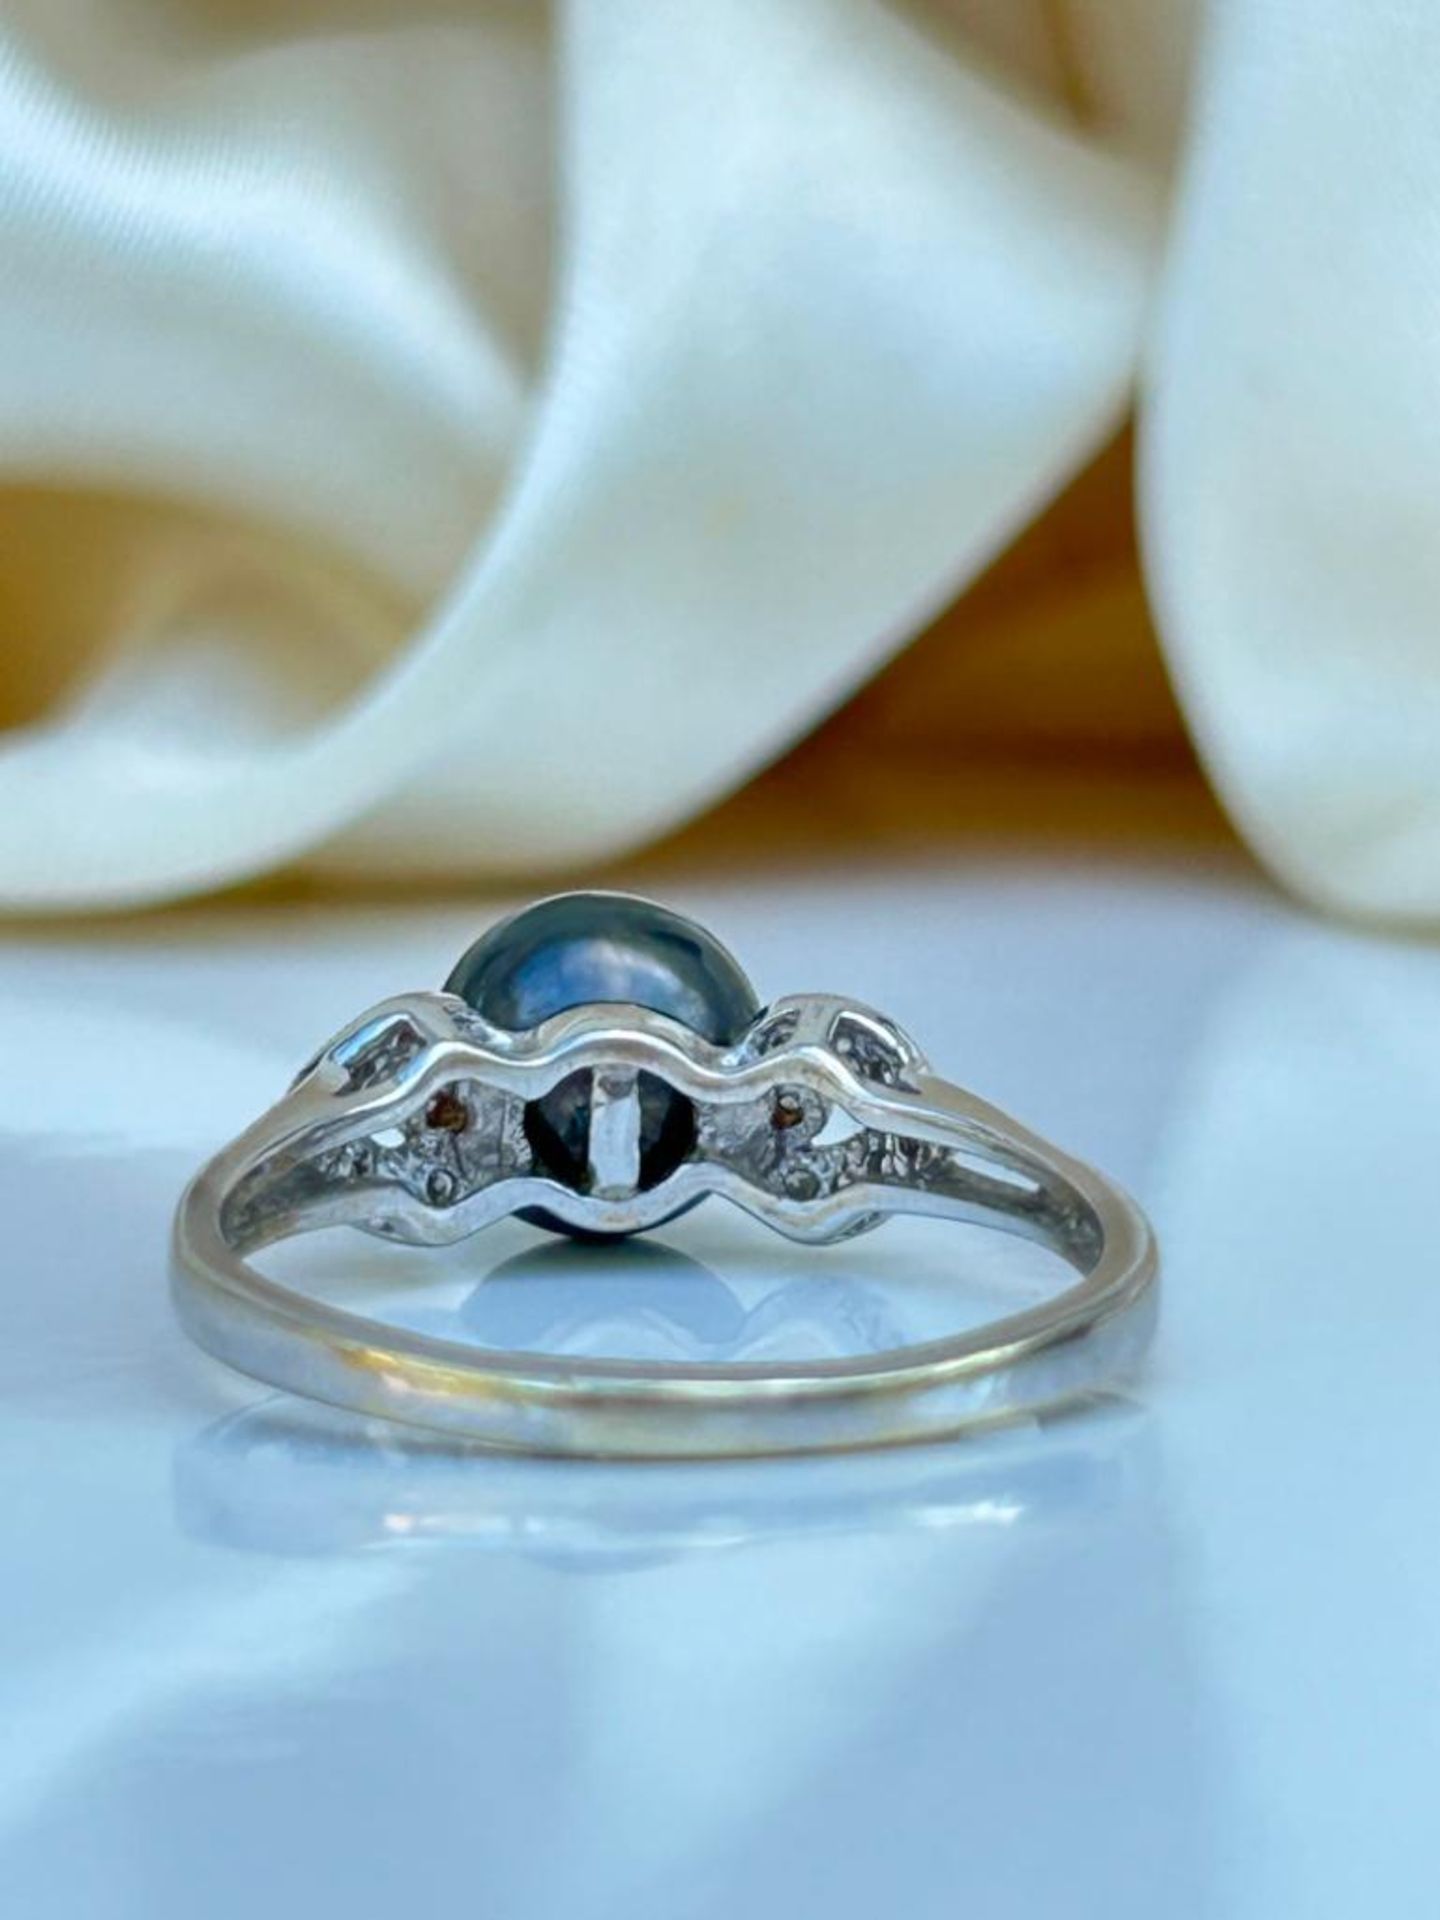 14ct White Gold South Sea Pearl and Diamond Ring - Image 7 of 9